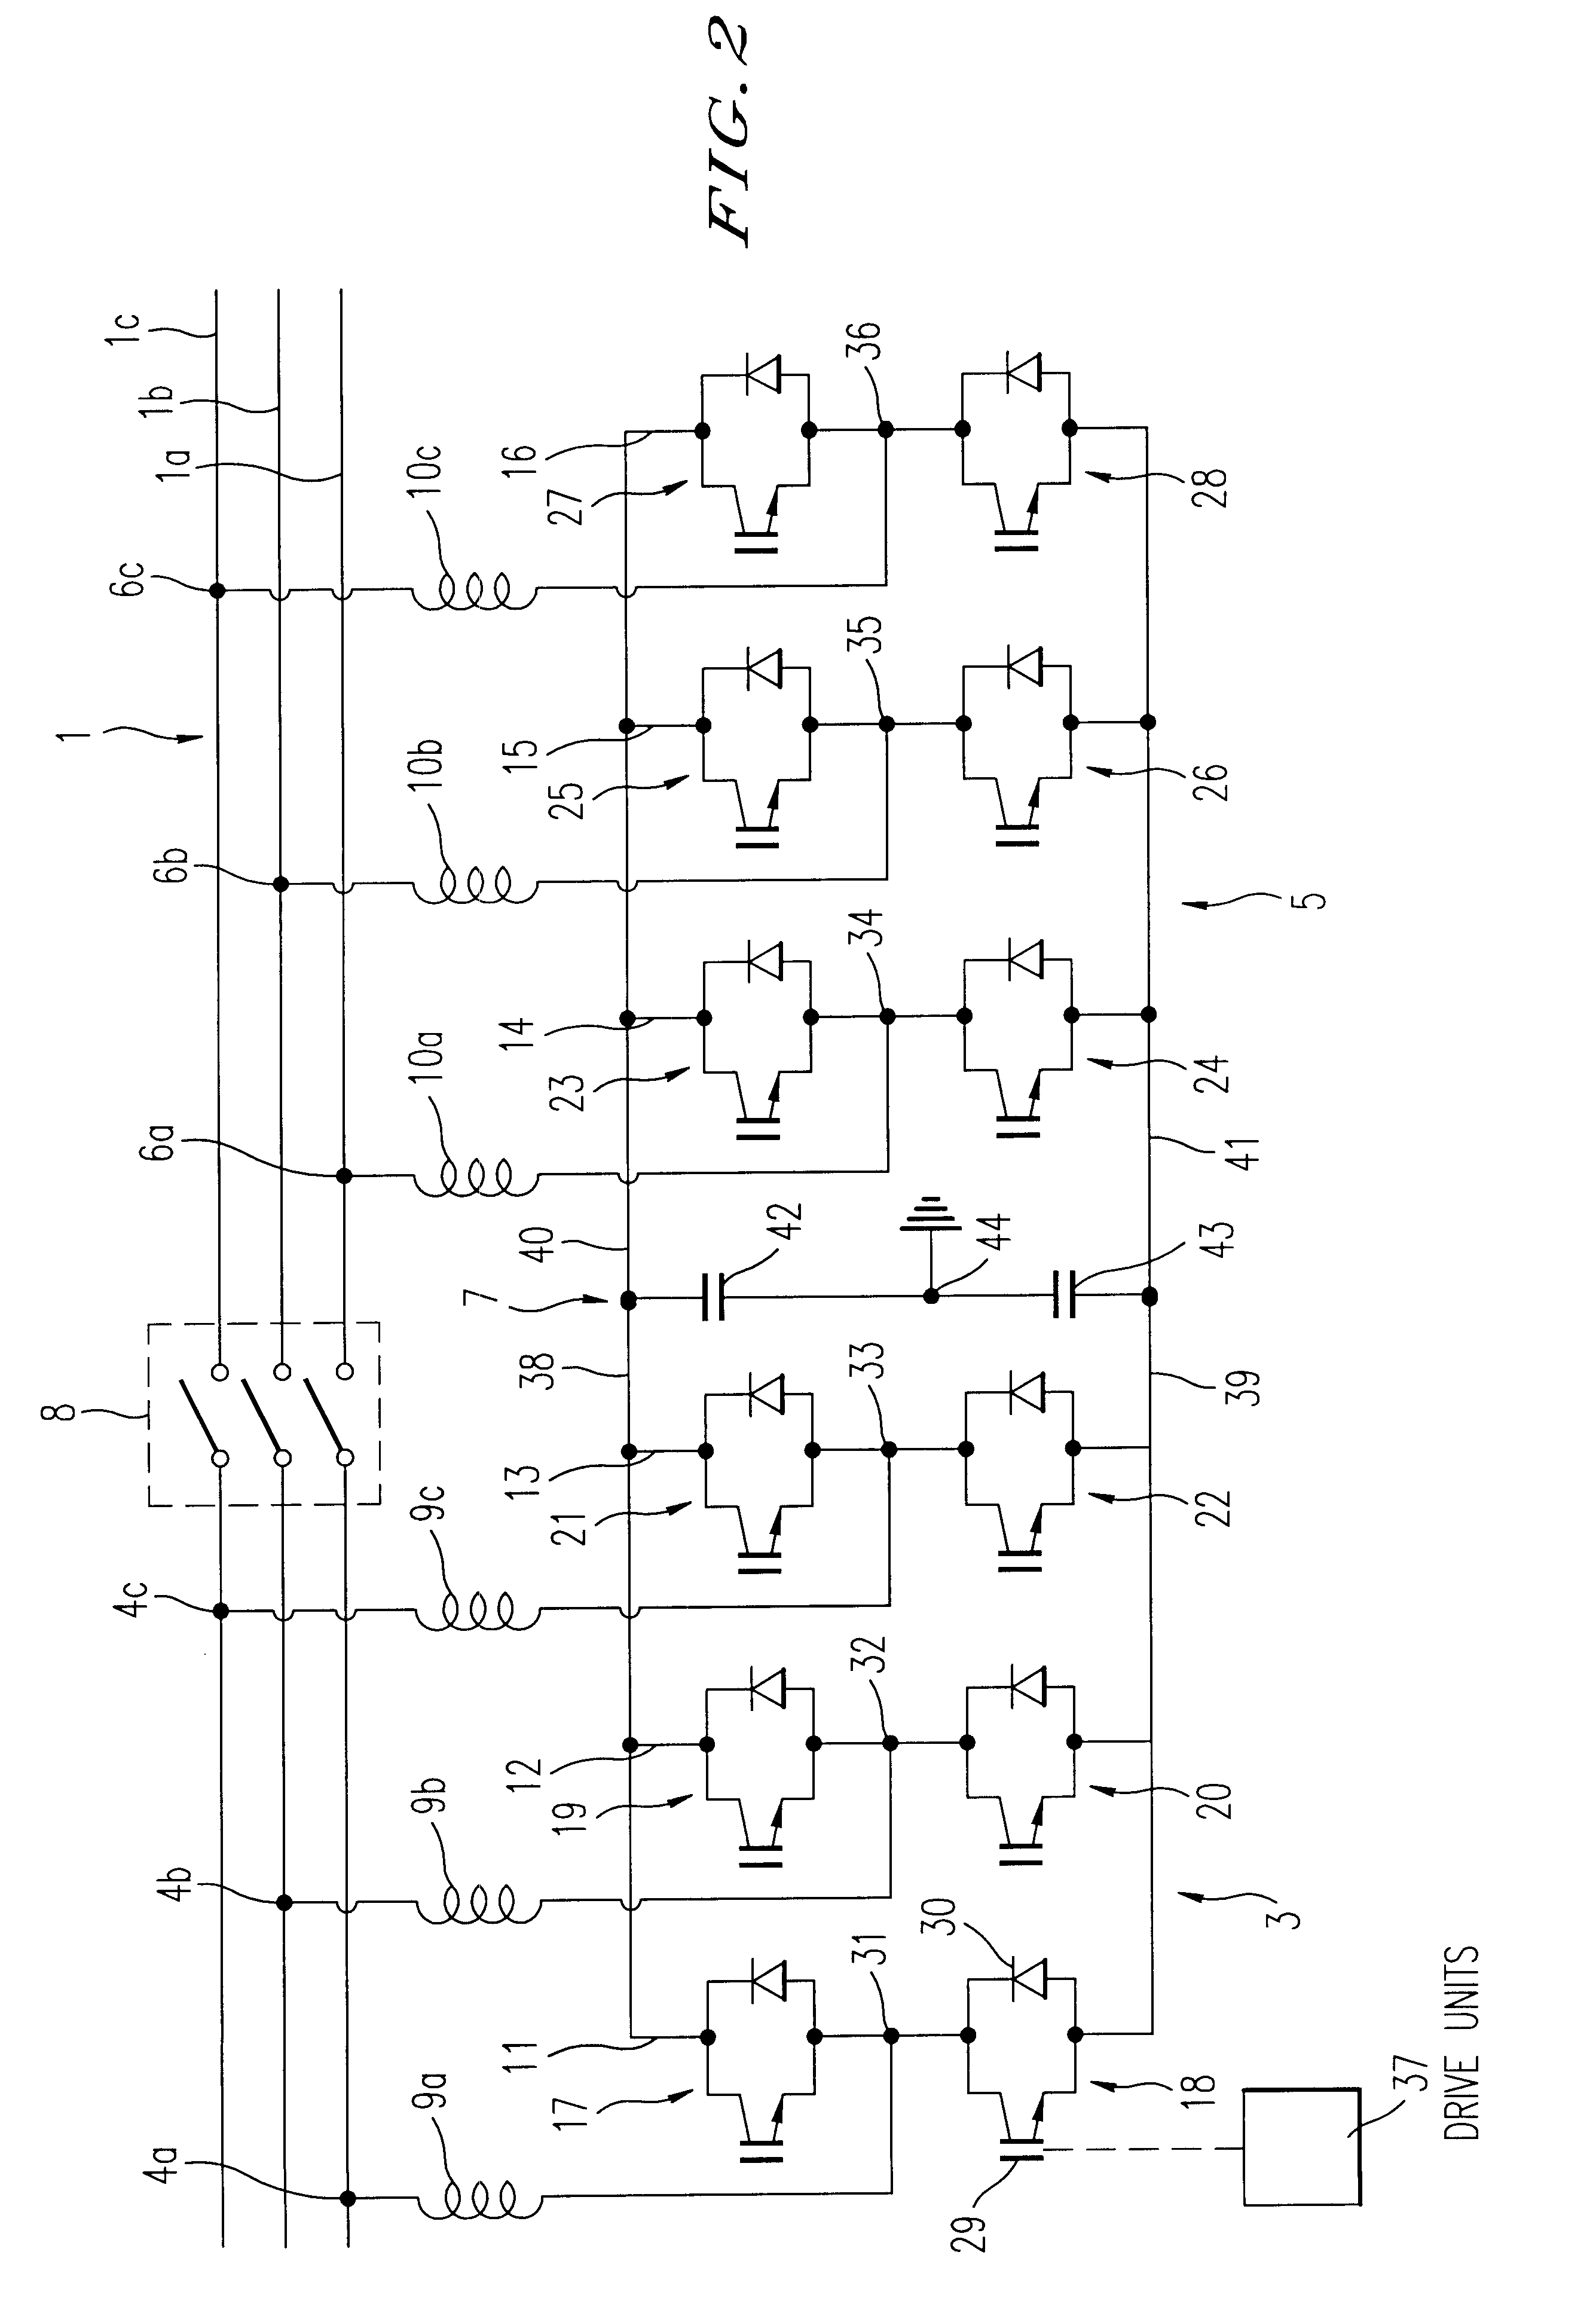 Voltage source converters operating either as back-to-back stations or as parallel static var compensators